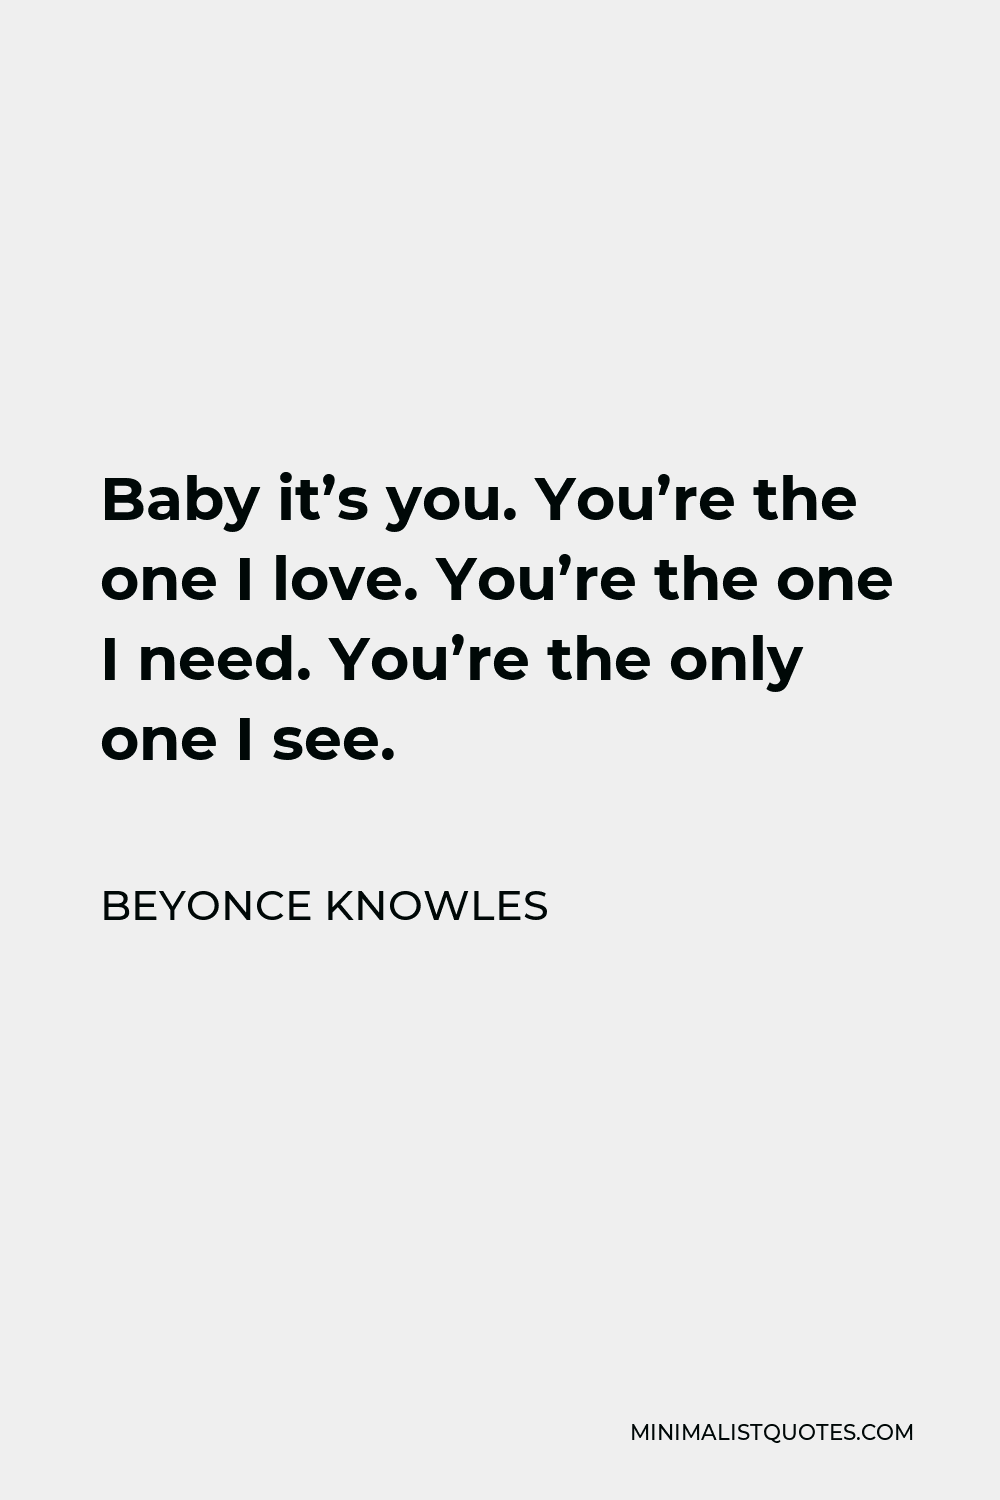 Beyonce Knowles Quote - Baby it’s you. You’re the one I love. You’re the one I need. You’re the only one I see.